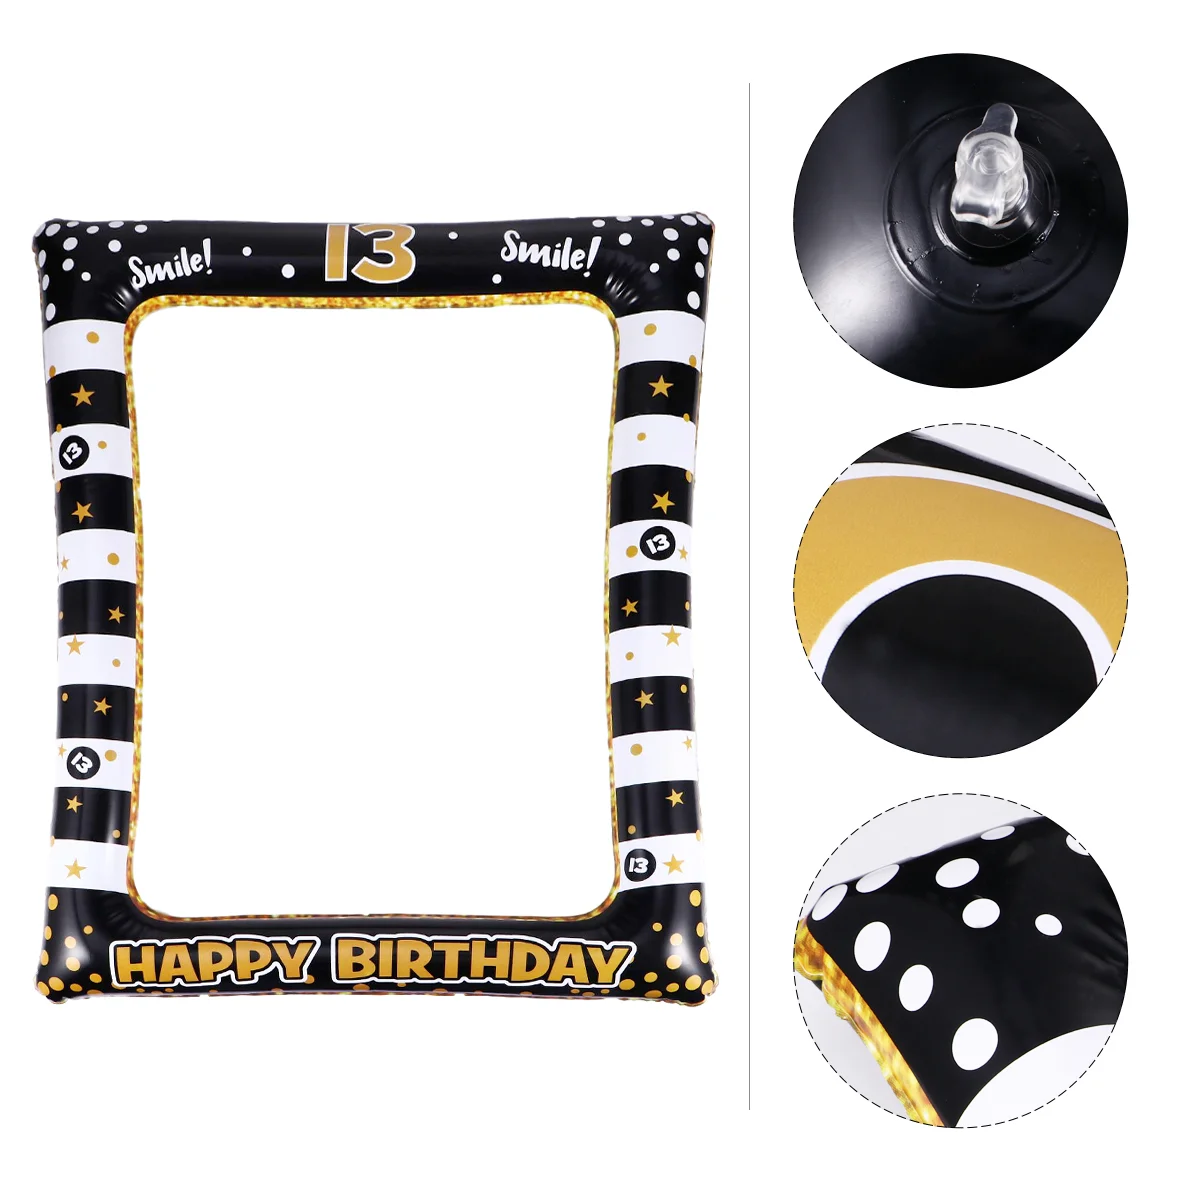 

Birthday Frame Photo Props Party 13Th Selfie Inflatable Booth Picture Prop Happy Festival Supplies Photography Pvc Sign Funny